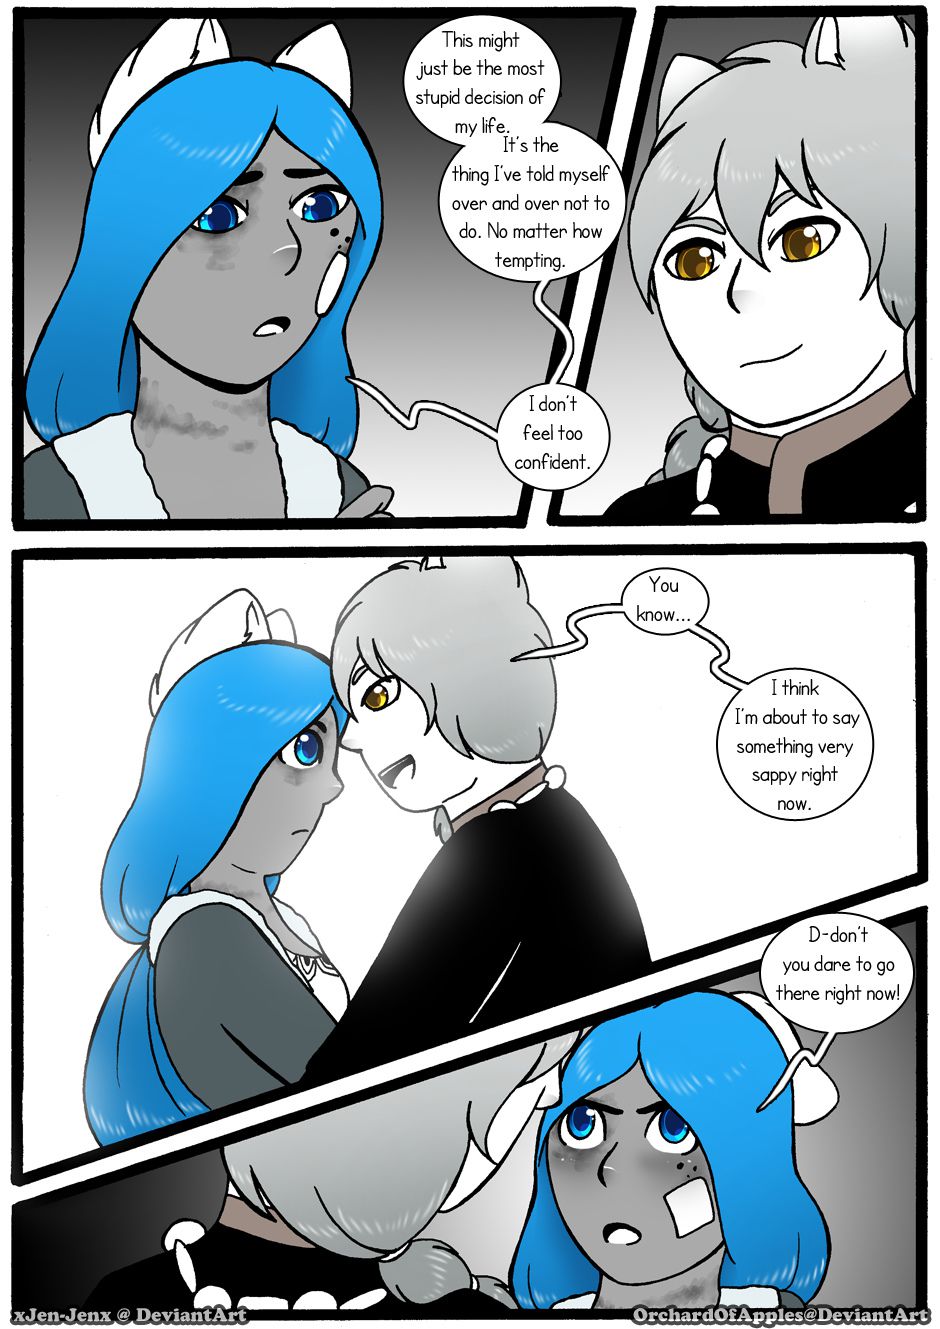 [Jeny-jen94] Between Kings and Queens [Ongoing] 179